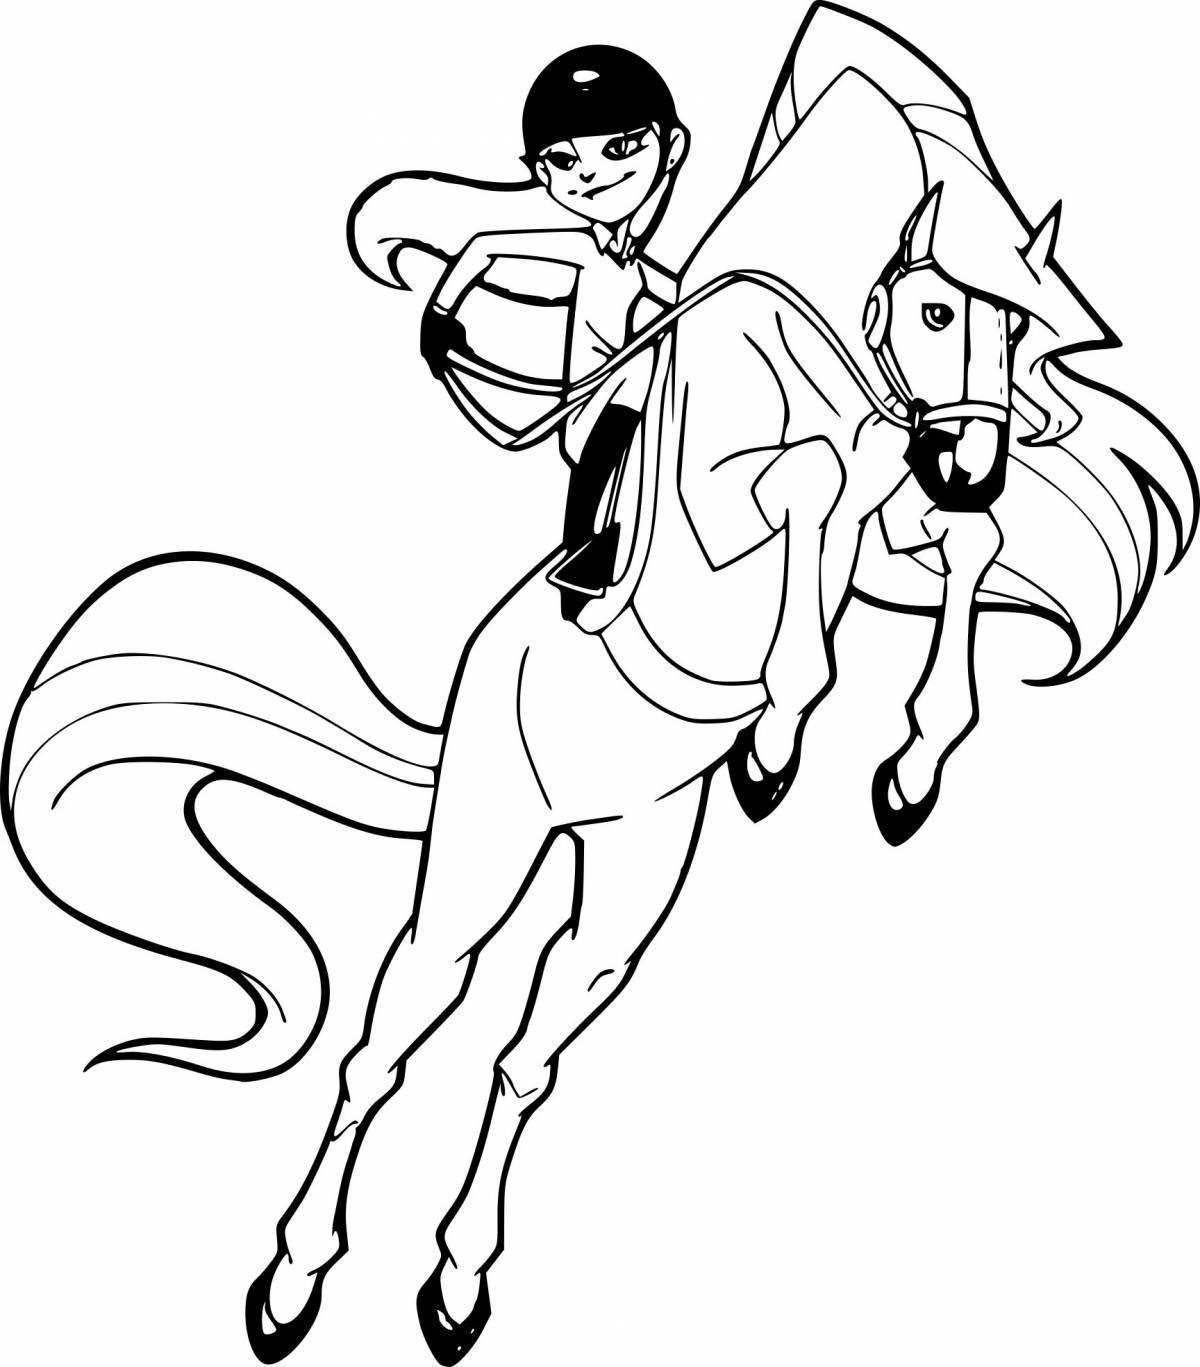 Coloring page living country of horses